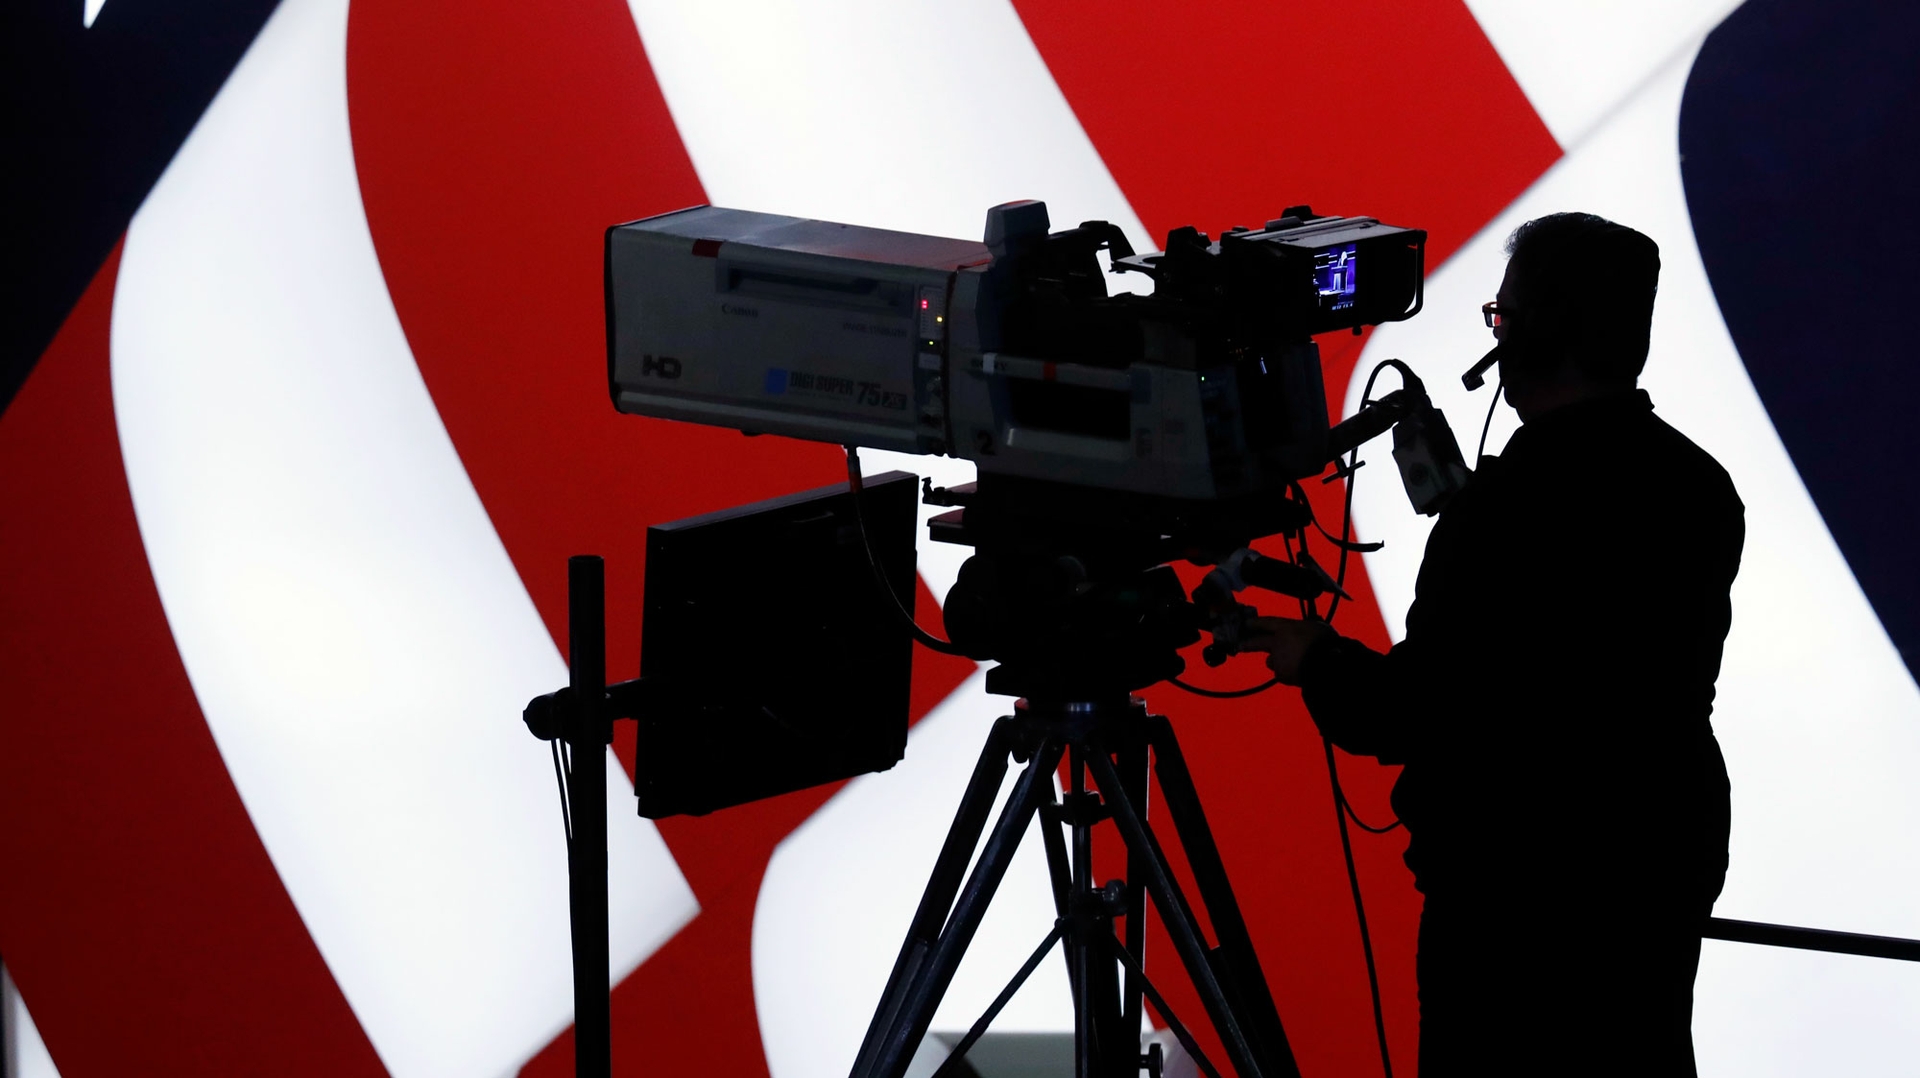 A television cameraman in silhouette against a U.S. flag suggests the deep importance of television advertising in political campaigns